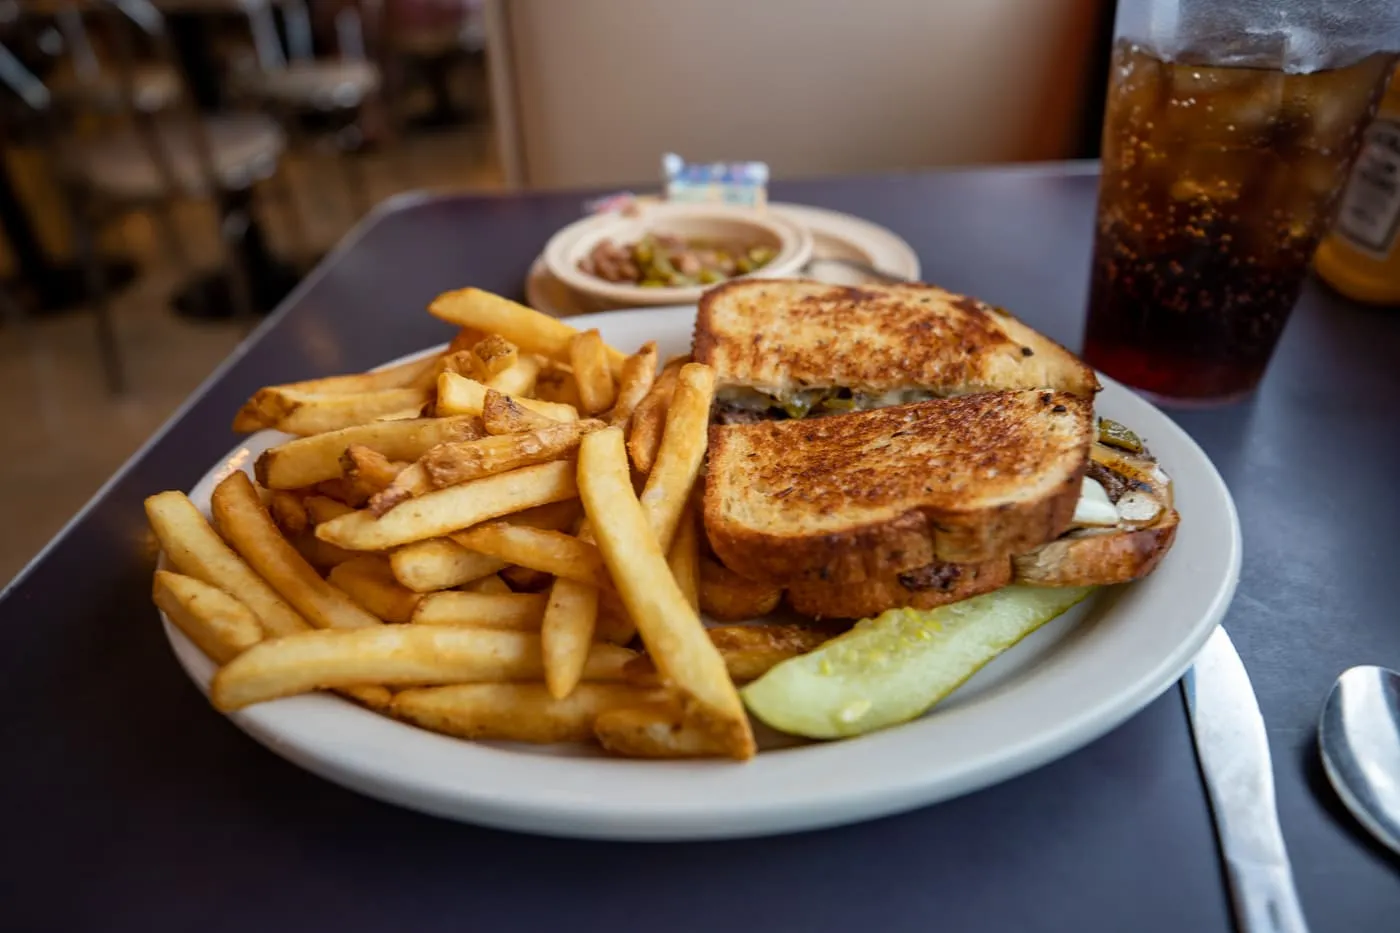 Albuquerque Patty Melt - patty melt with chopped green chilies at Owl Cafe in Albuquerque, New Mexico (Route 66) - Arizona Route 66 roadside attraction and diner